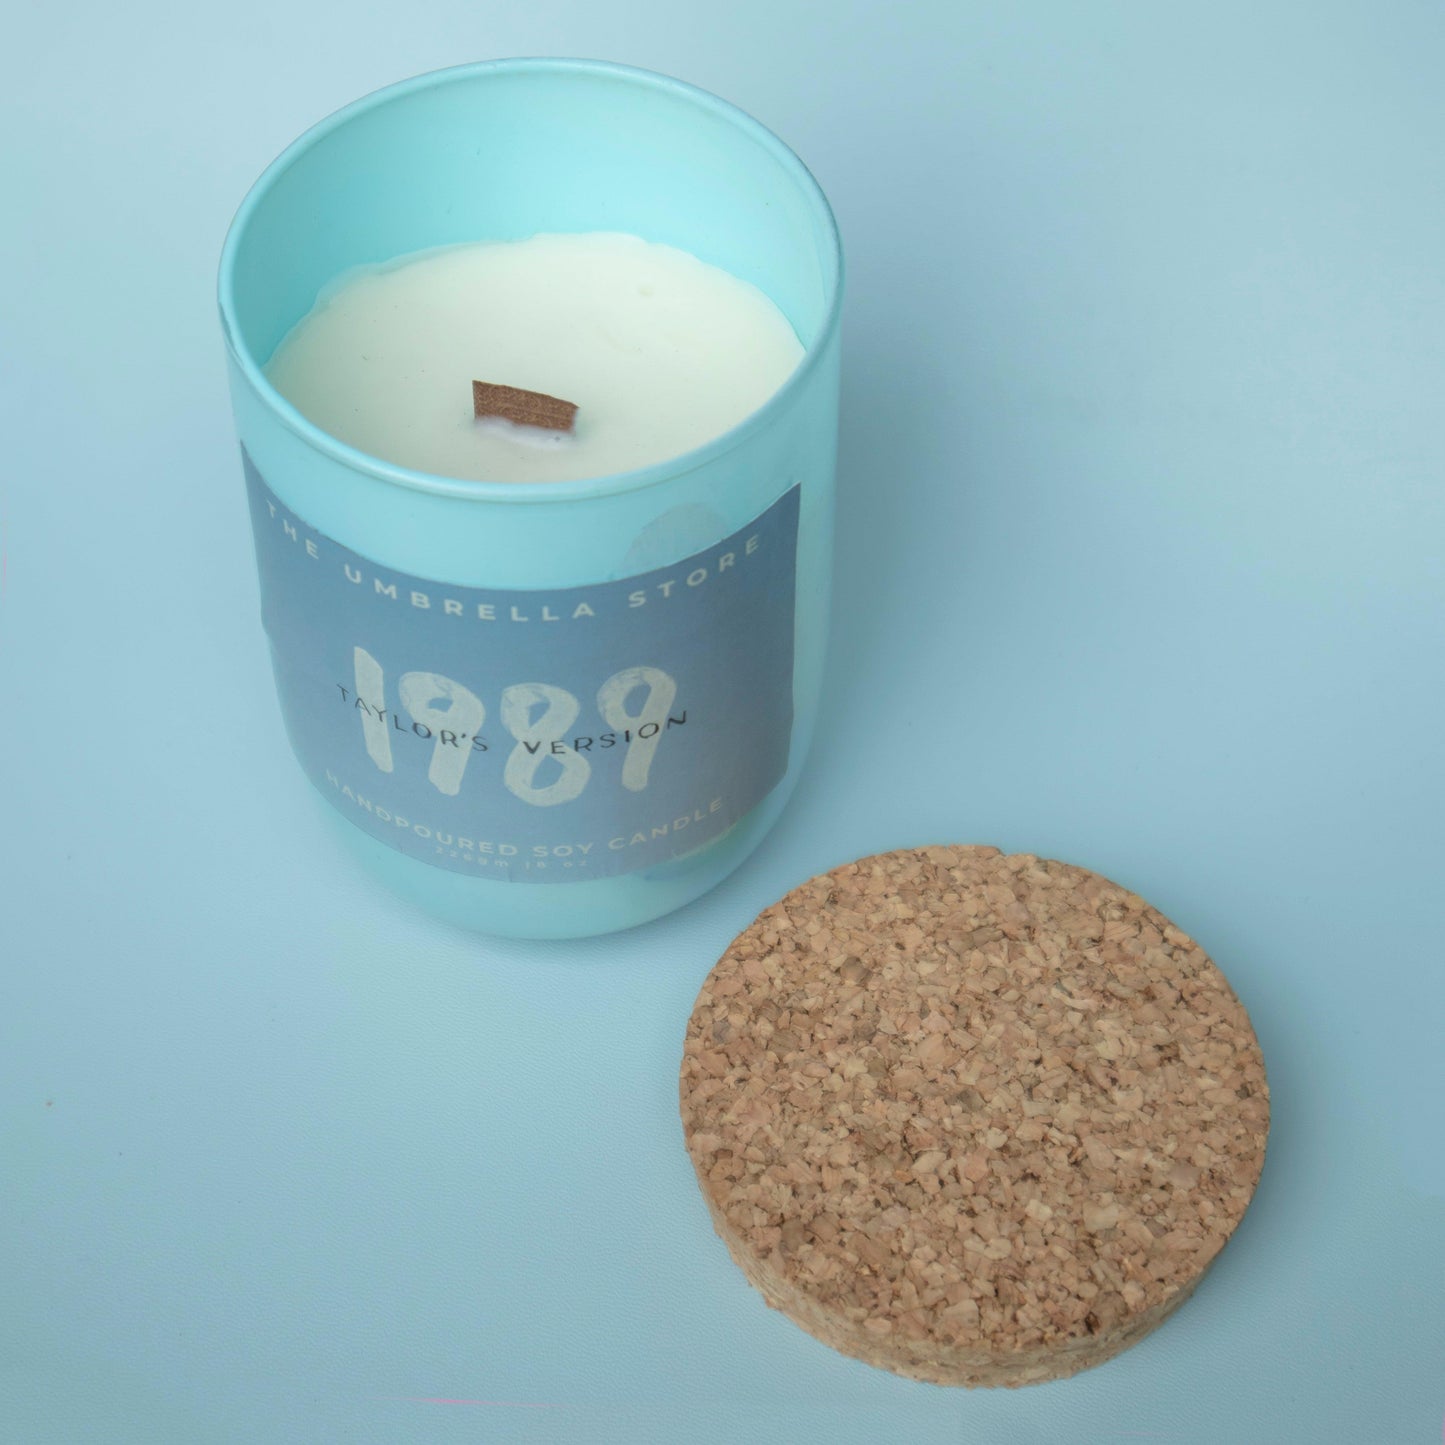 1989 Taylor'S Version Scented Candle | Single | 3.5 inches x 2.5 inches x 5 inches - Dusaan